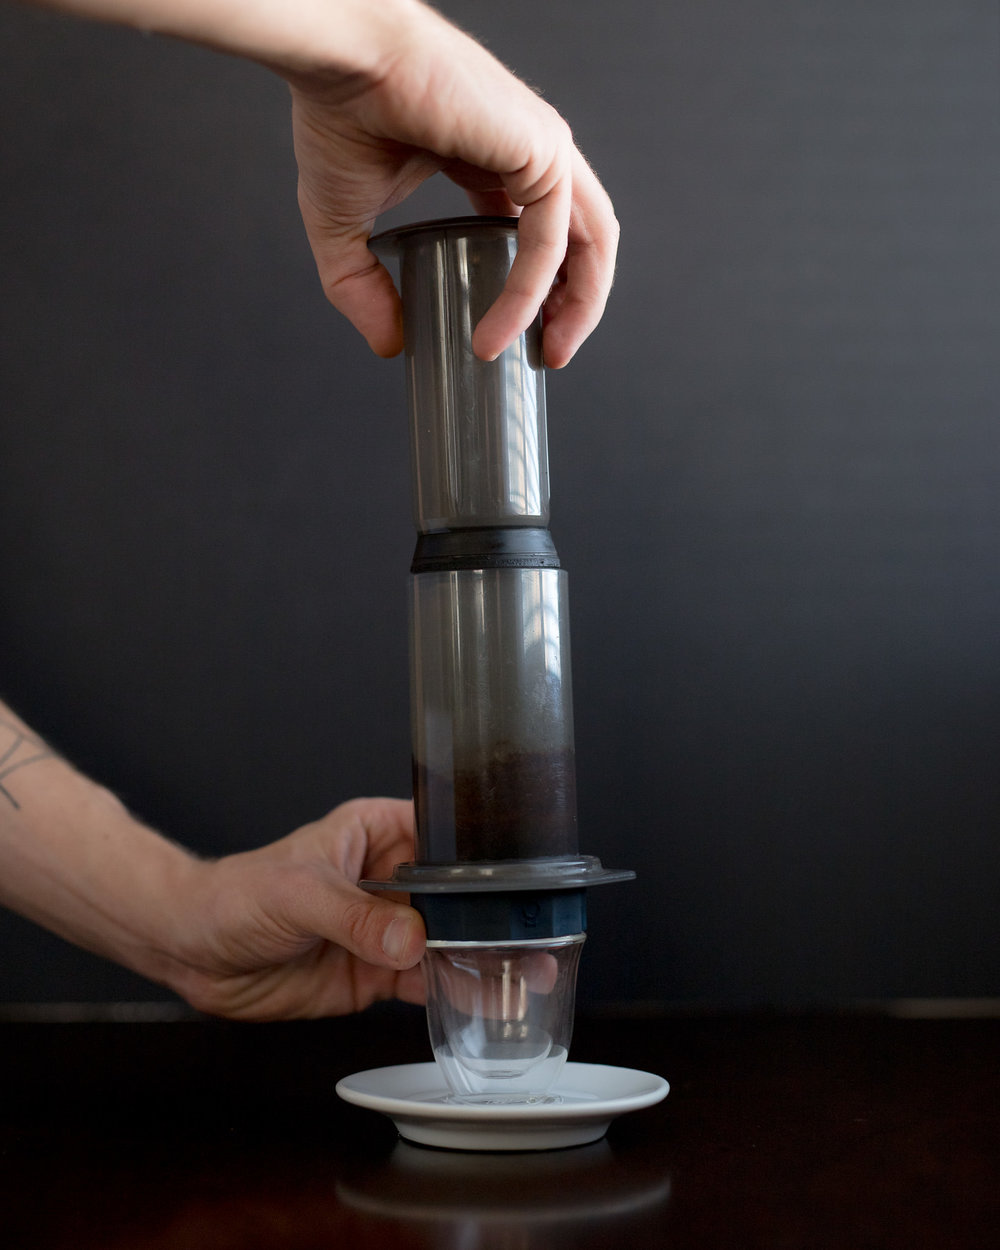 Brace the cup and bottom of the Aeropress with one hand